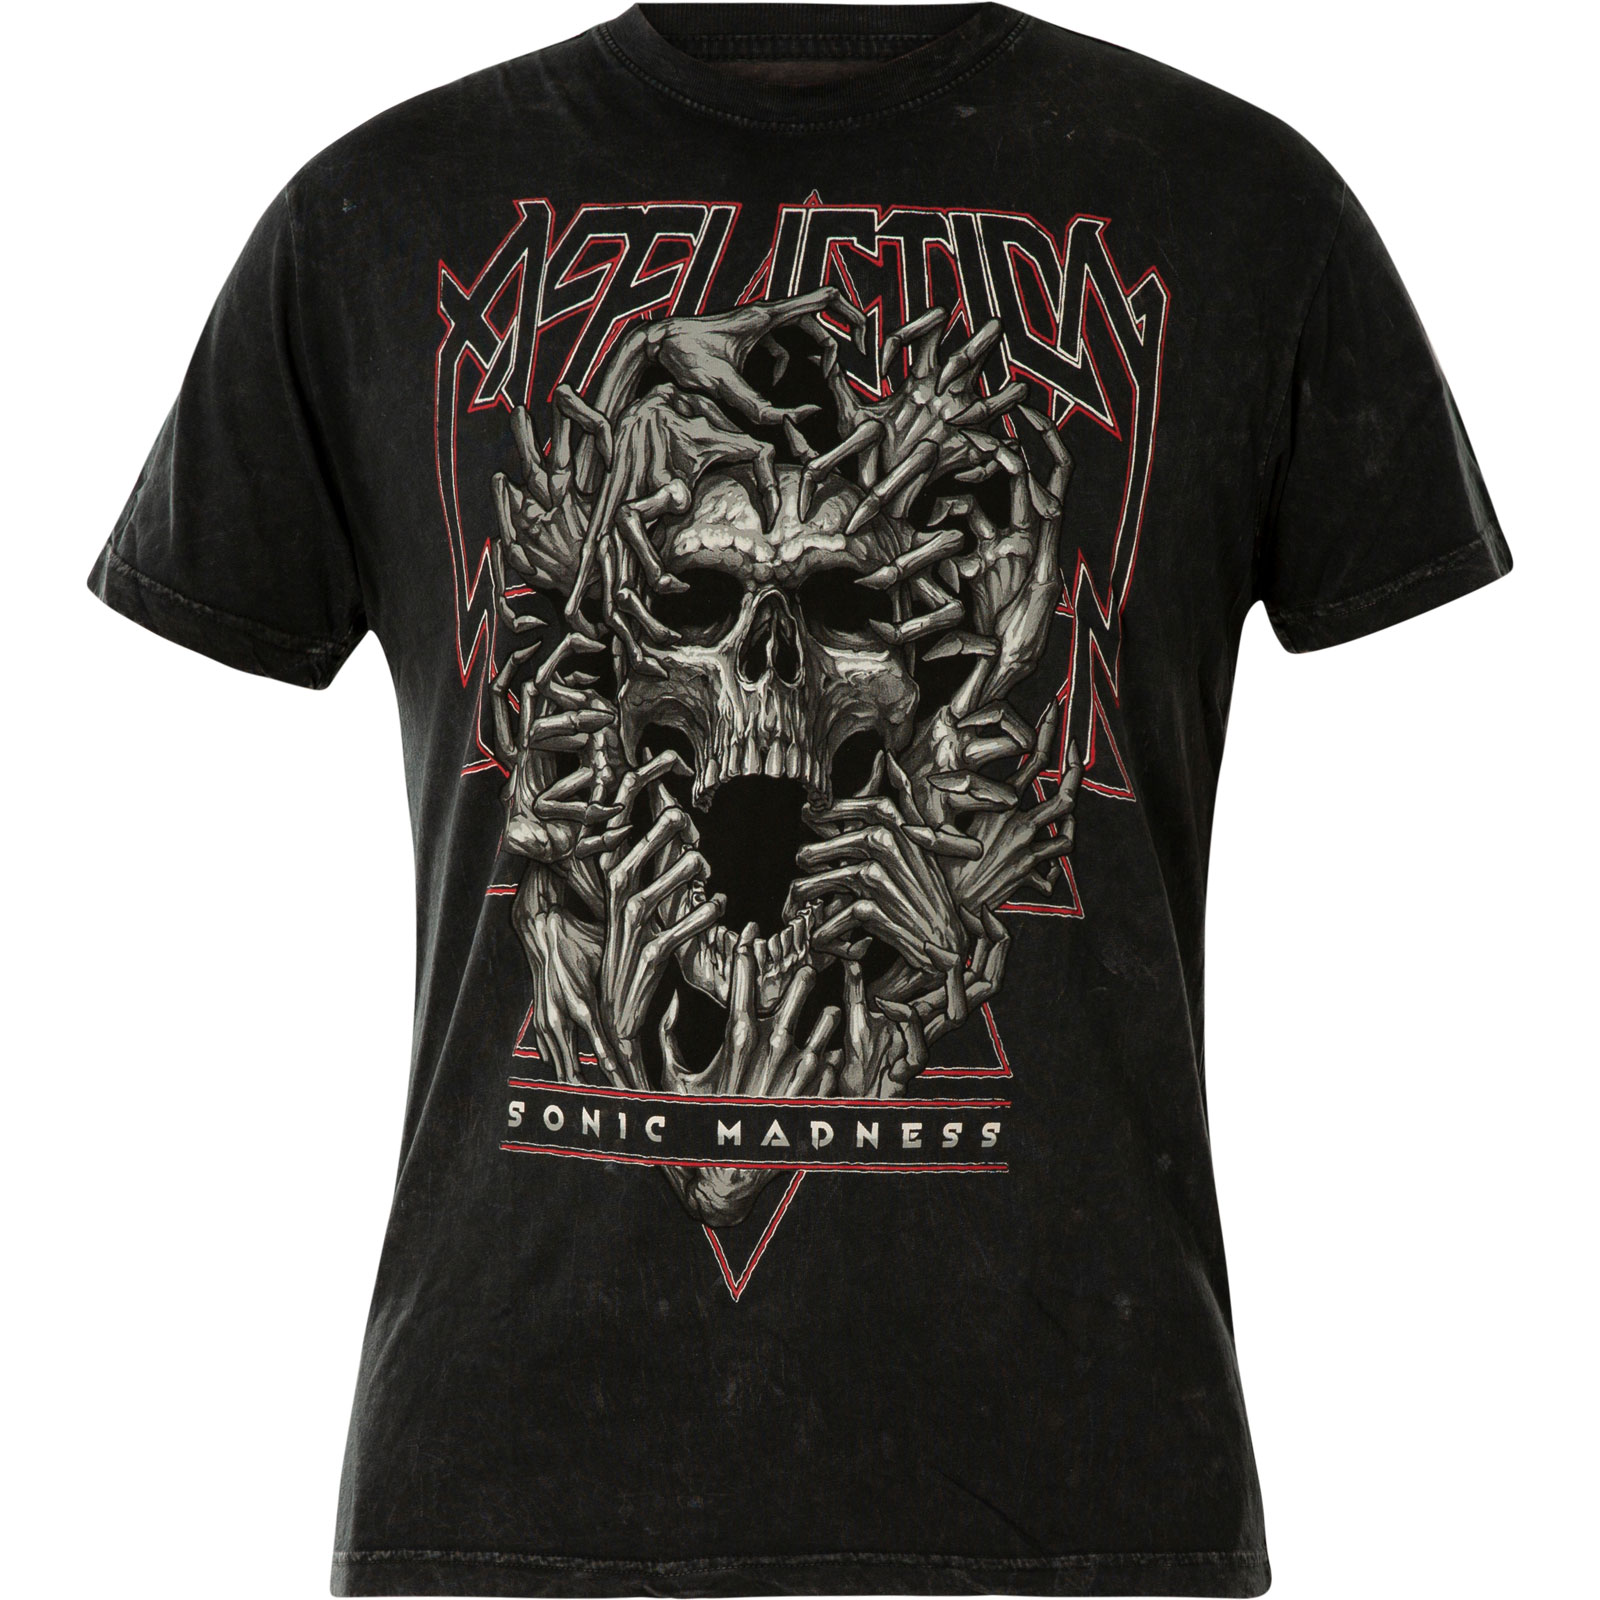 Affliction Sonic Madness T-Shirt Print with skull